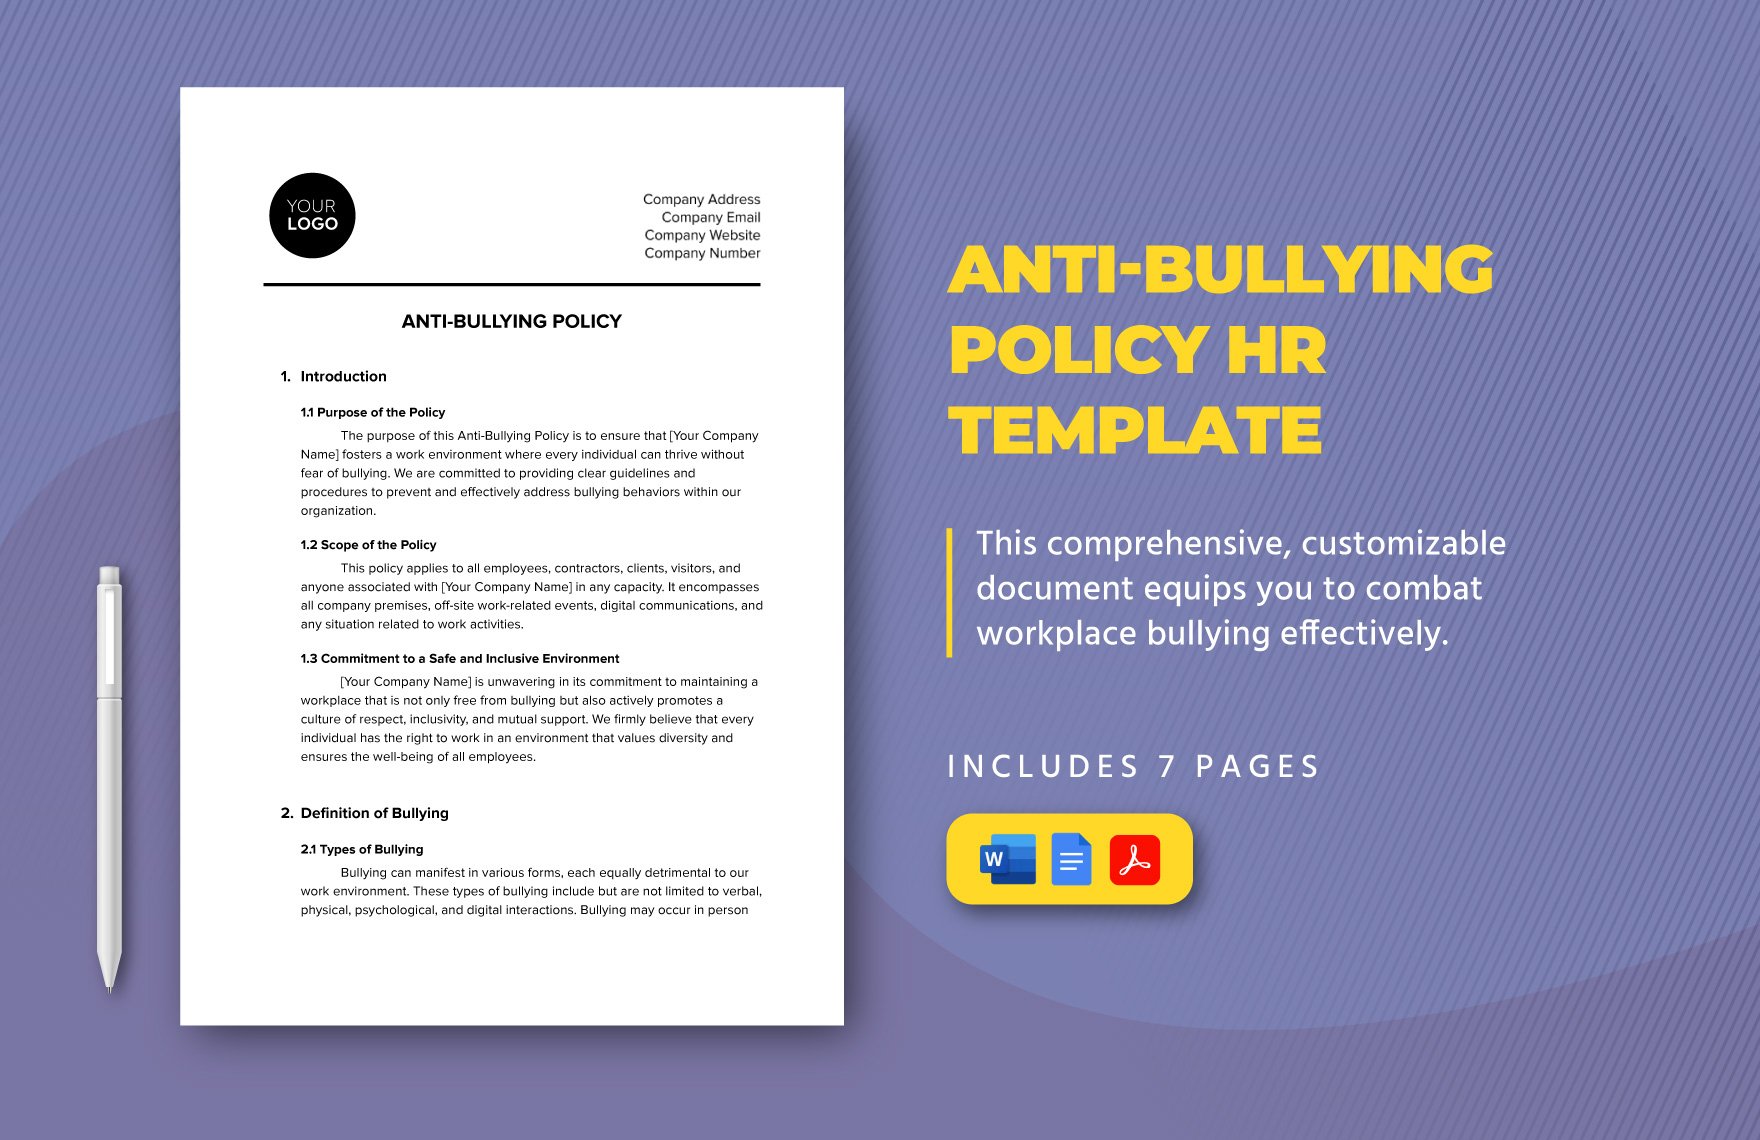 Anti-Bullying Policy HR Template